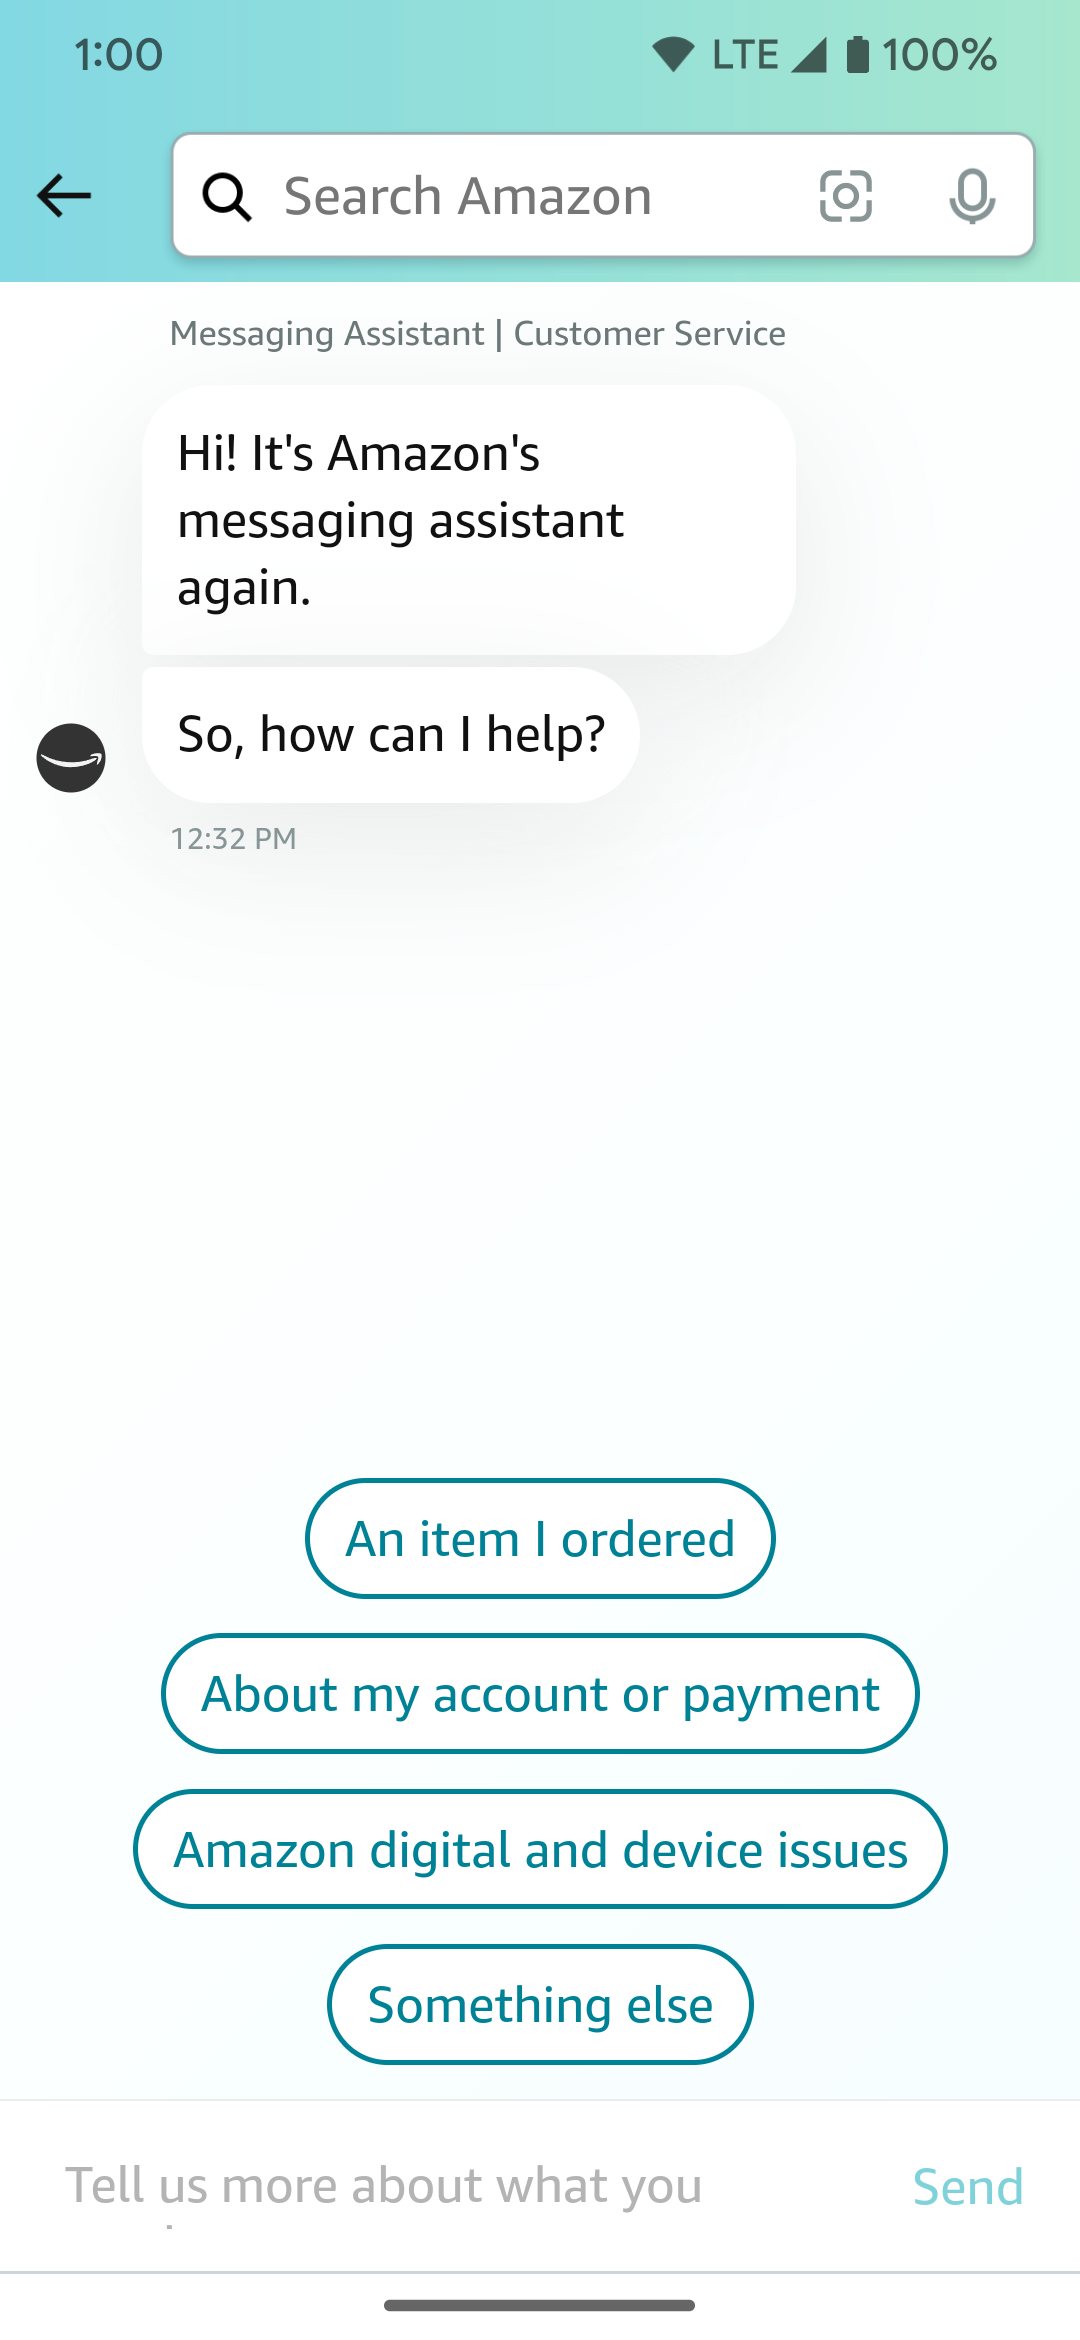 Here's an example of the default screen when the Amazon chatbot is connected on the Android app